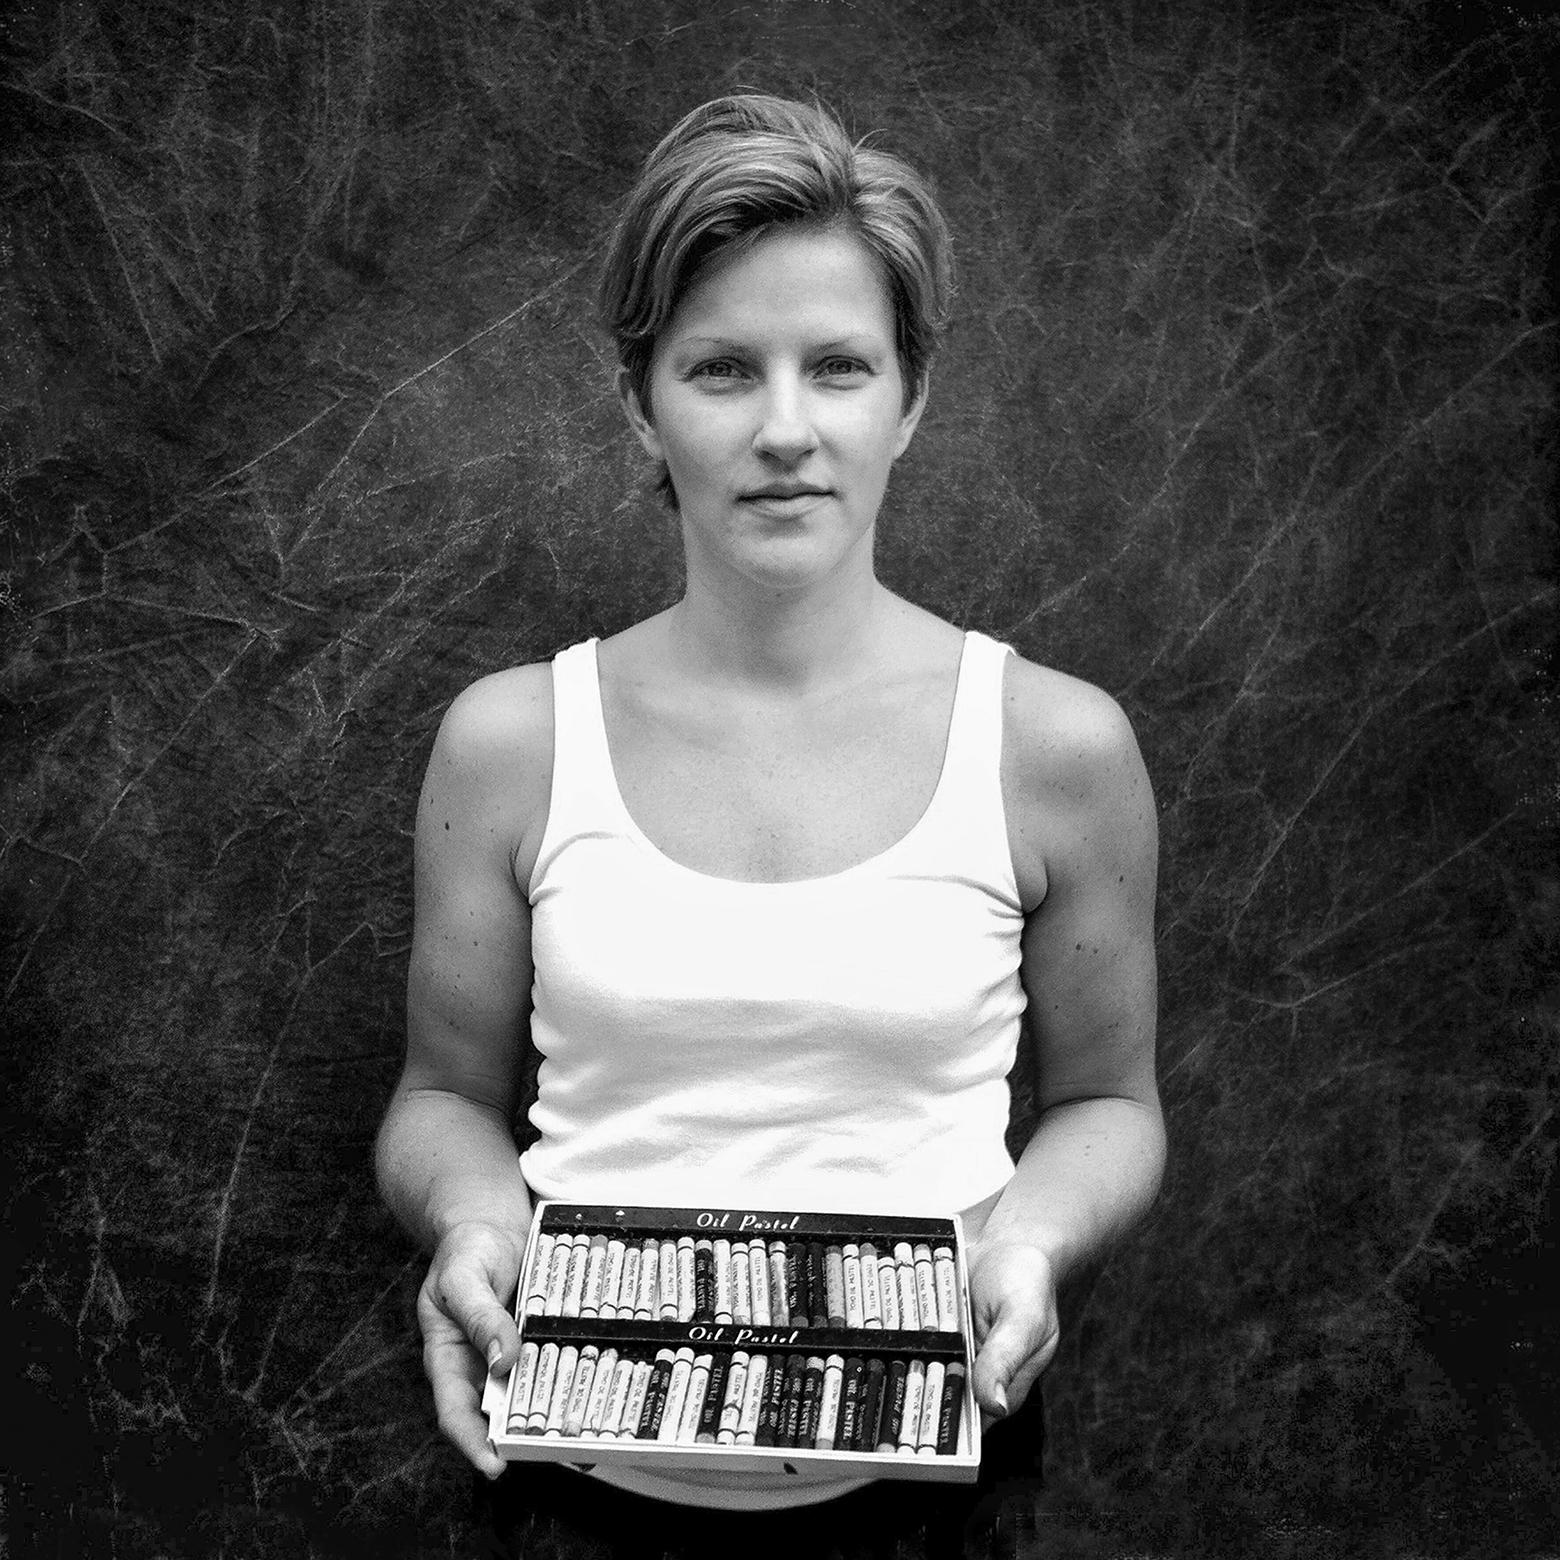 A woman with short hair in a white tank top holds an open box with two rows of drawing oil pastels.